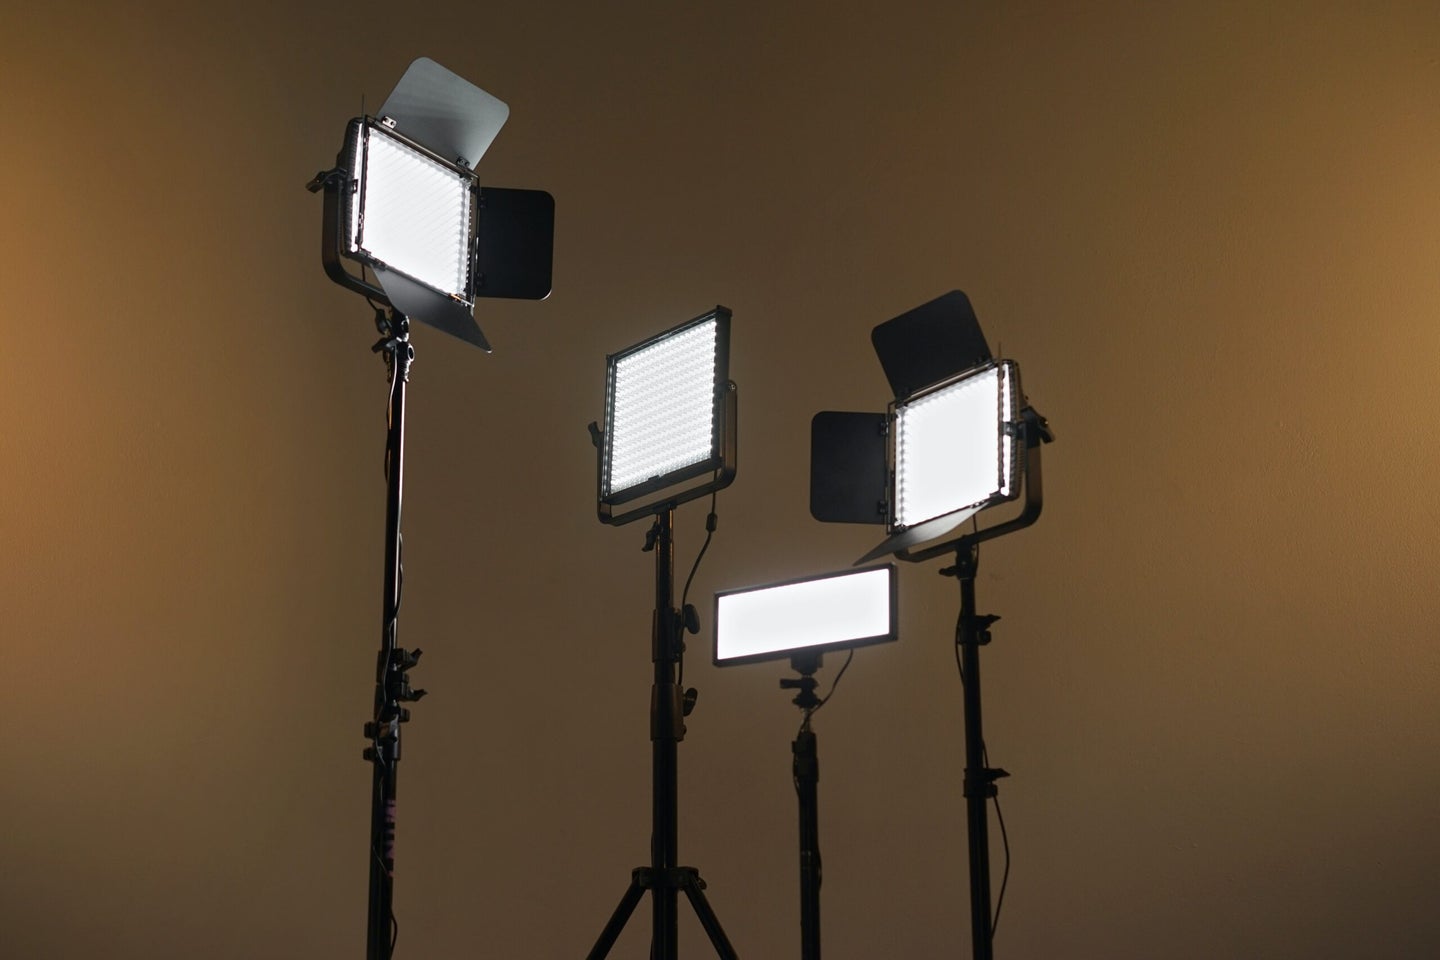 The LED light panels of | Popular Photography